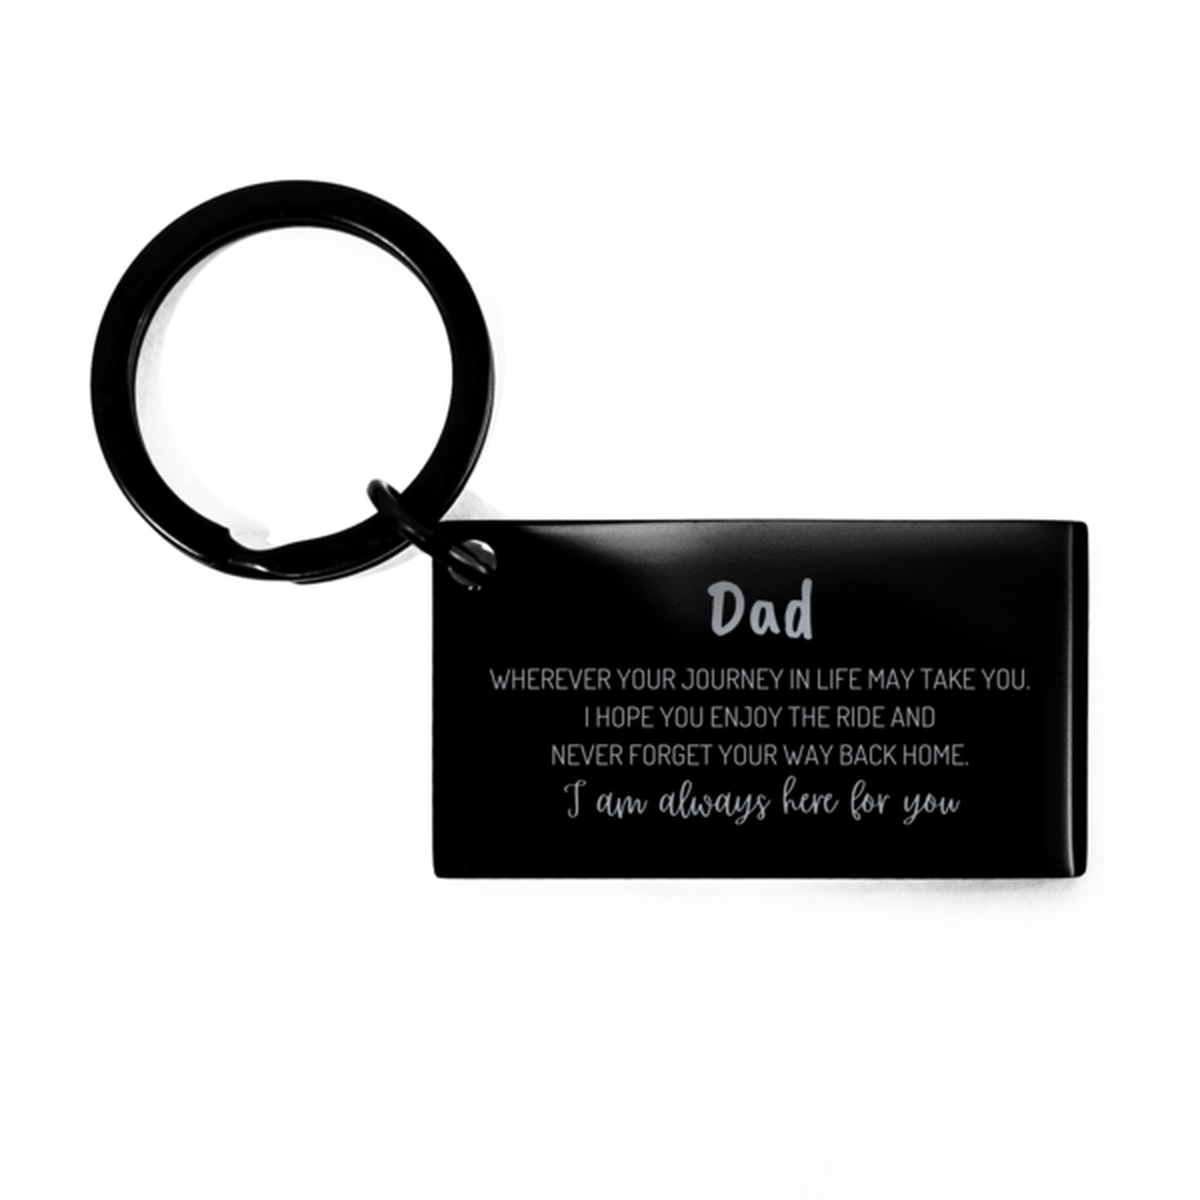 Dad wherever your journey in life may take you, I am always here for you Dad Keychain, Awesome Christmas Gifts For Dad, Dad Birthday Gifts for Men Women Family Loved One